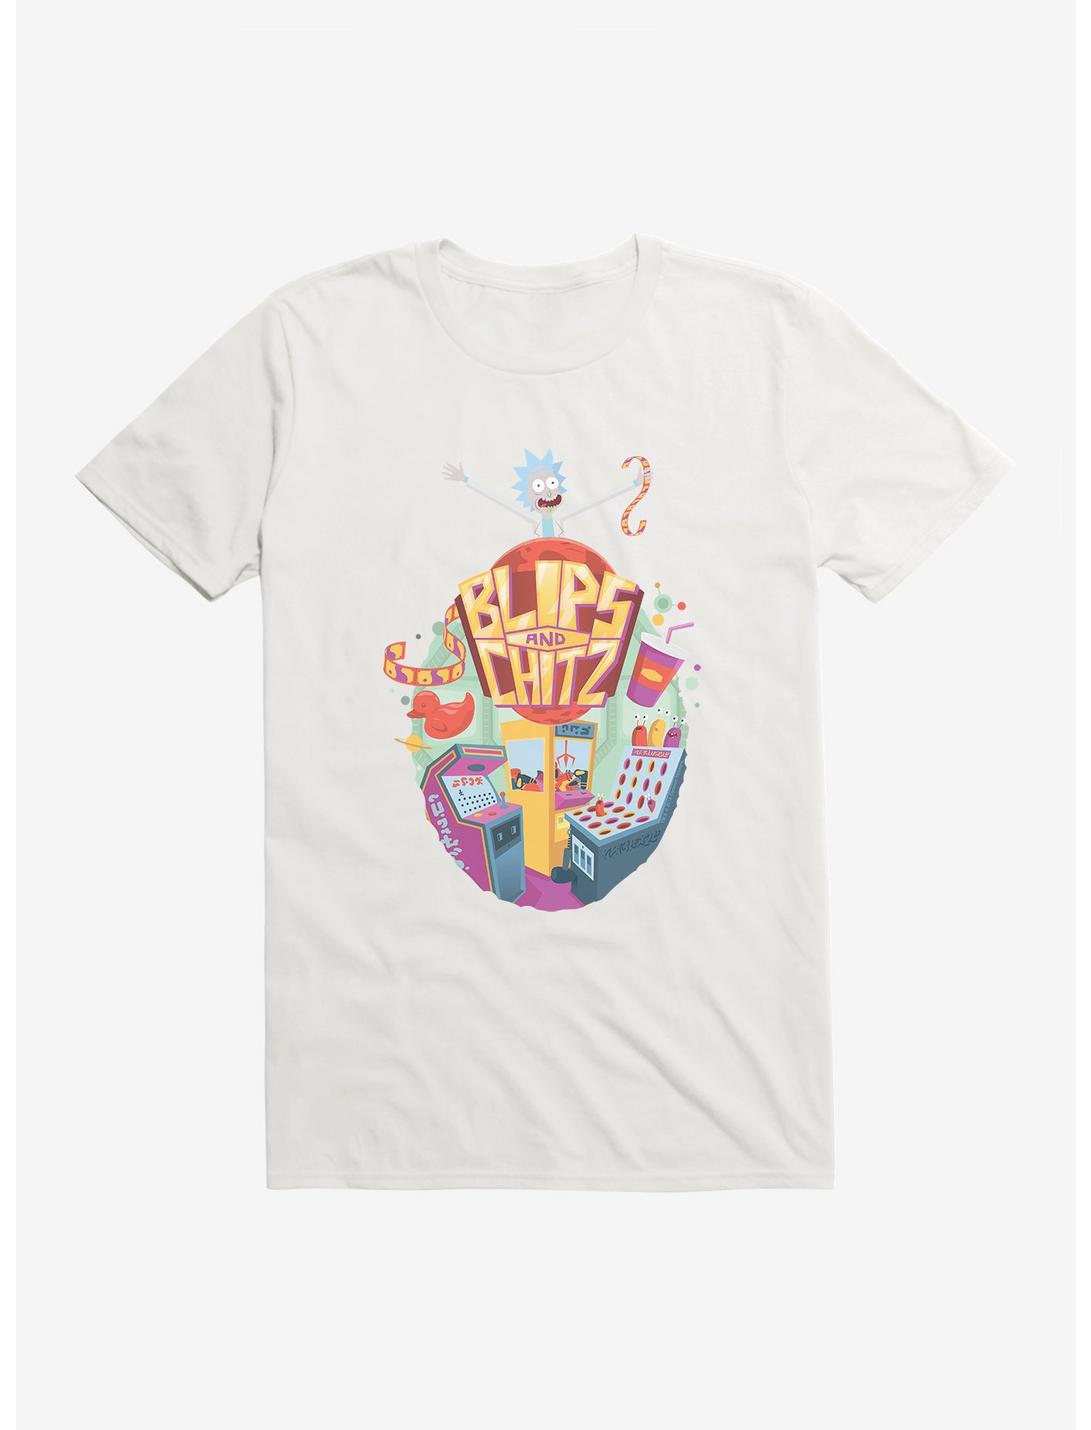 Rick and Morty Blips and Chitz T-Shirt, WHITE, hi-res